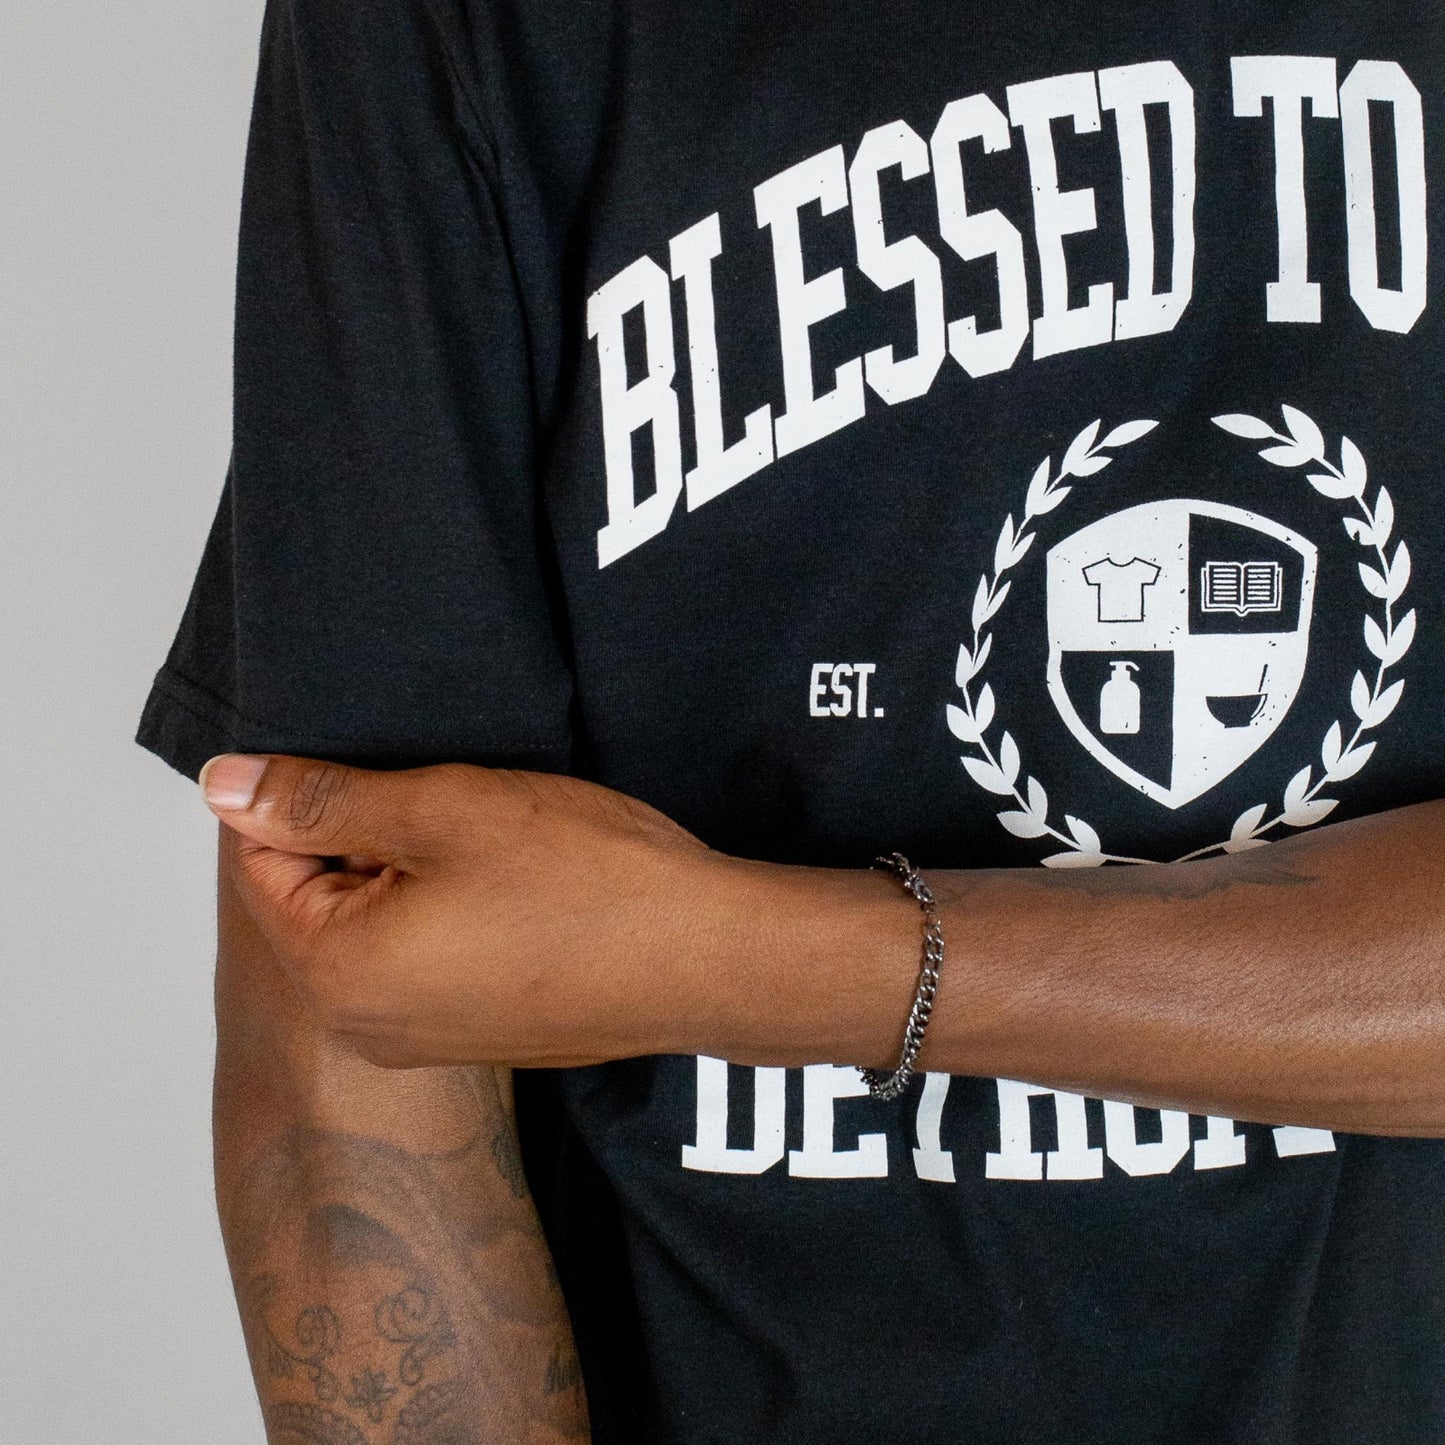 Blessed To Give Crest Tee - Black